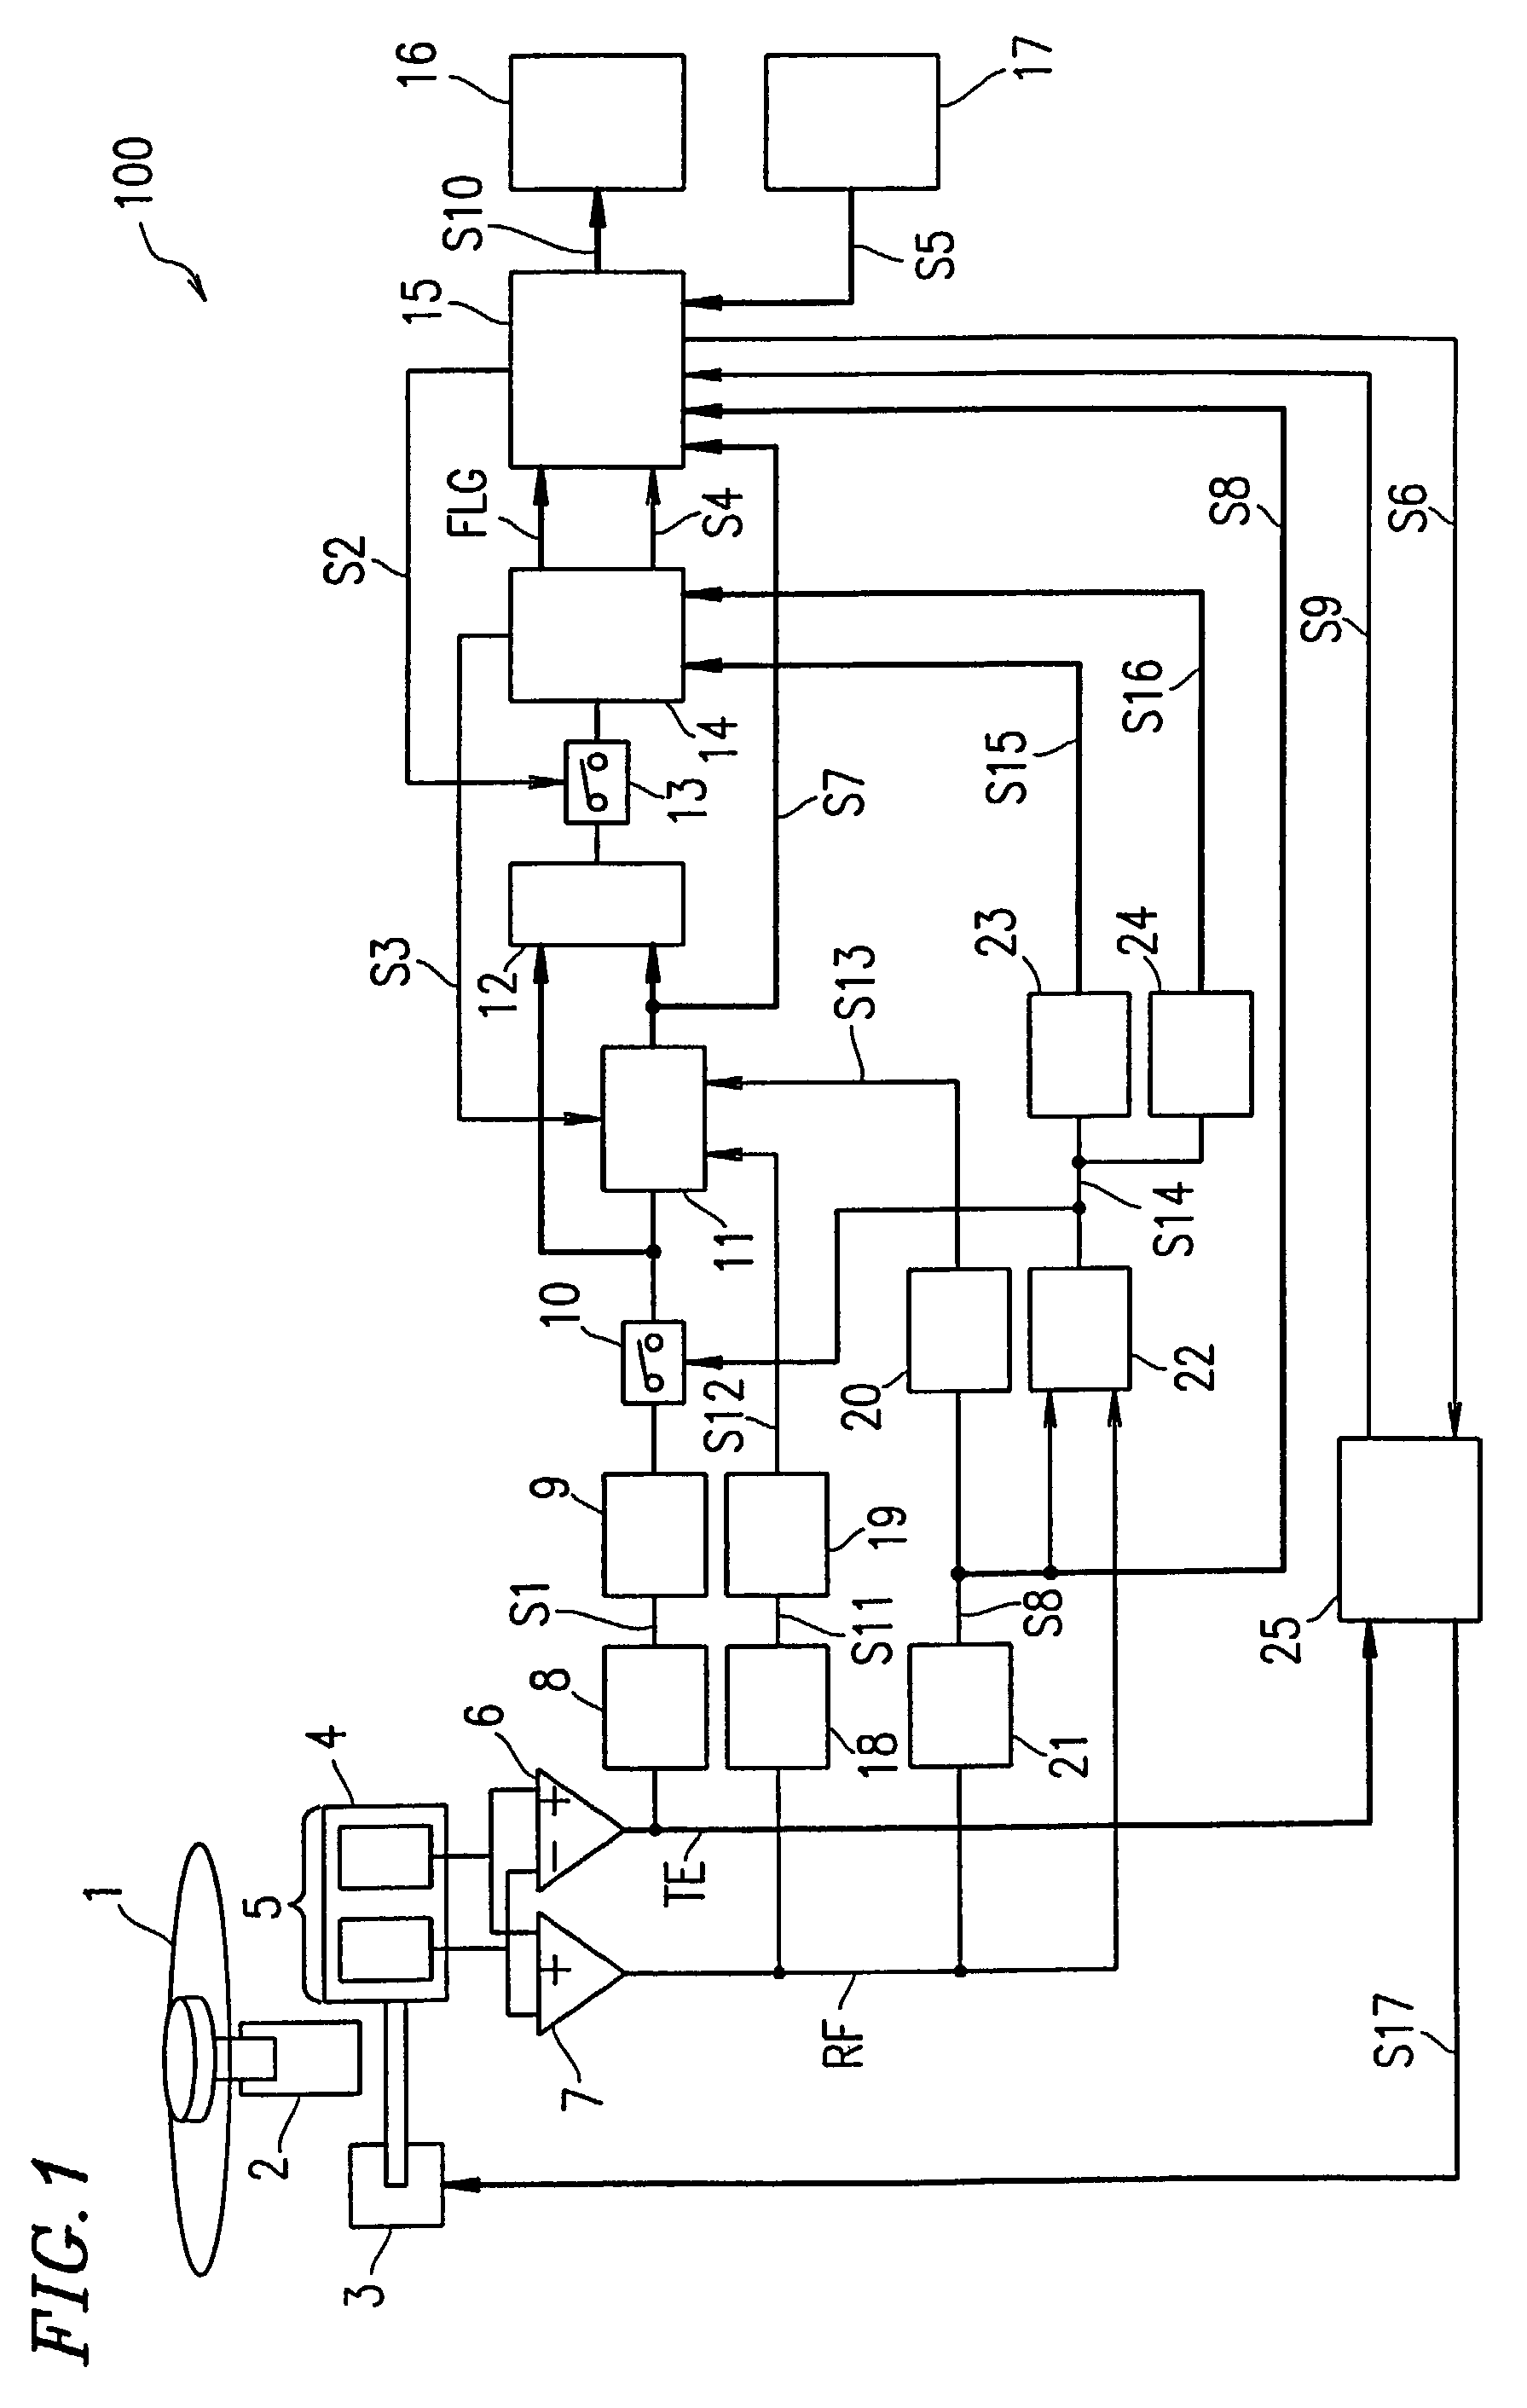 Optical disk recording/reproduction apparatus with a detection means for detecting dirt on the optical disk